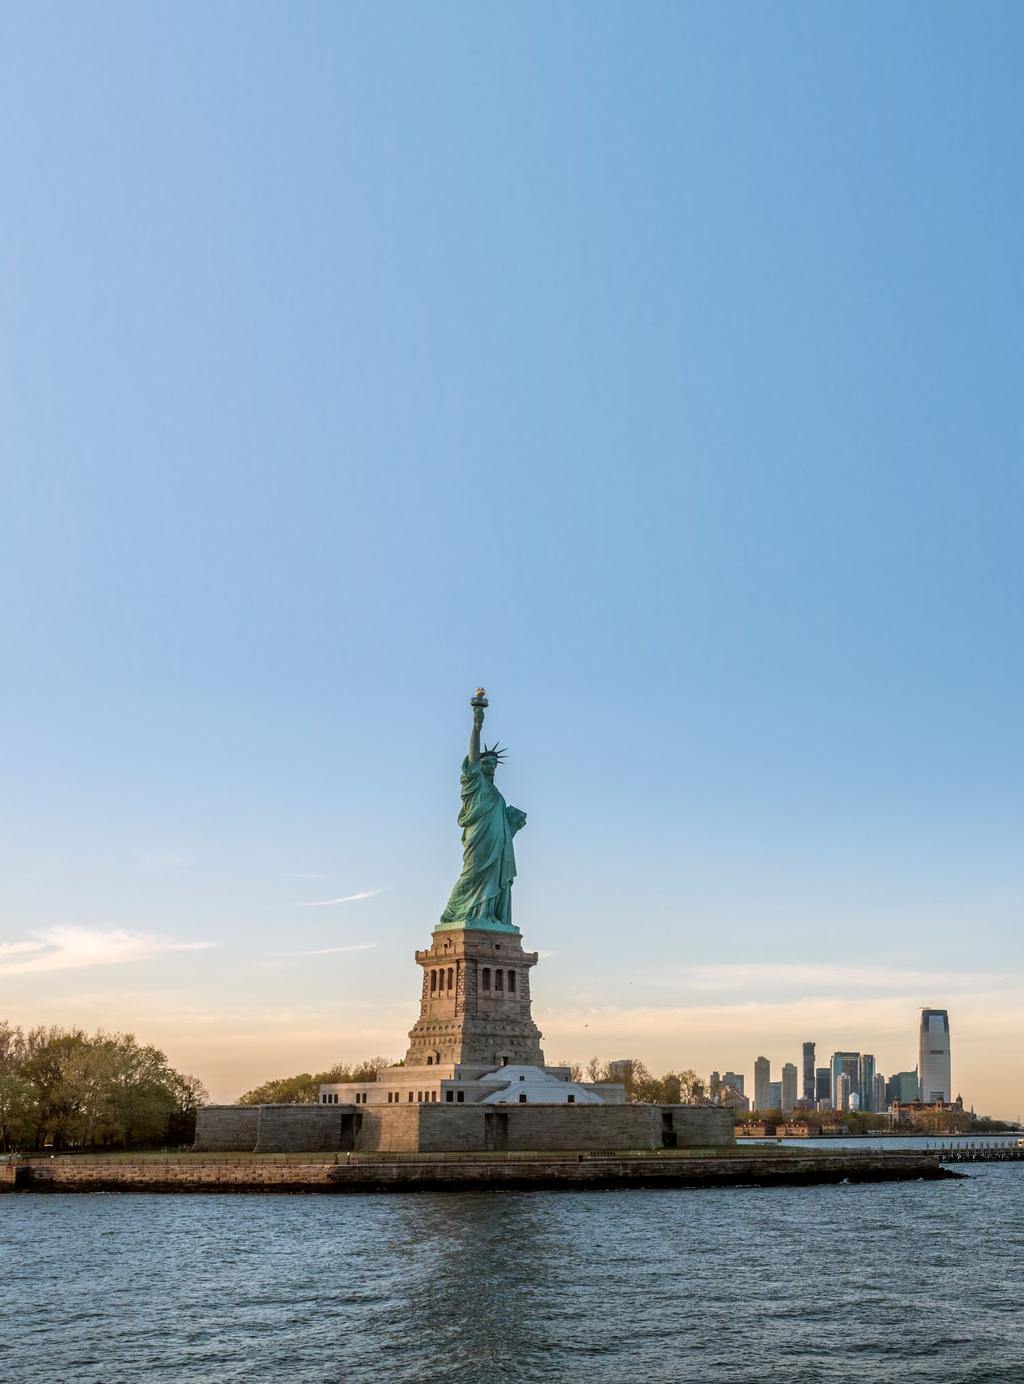 Our USA attorney partners Established in 1997 and headquartered in Manhattan, our partners have an advanced Immigration practice, specialising in EB-5 Investments, Citizenship by Investment,